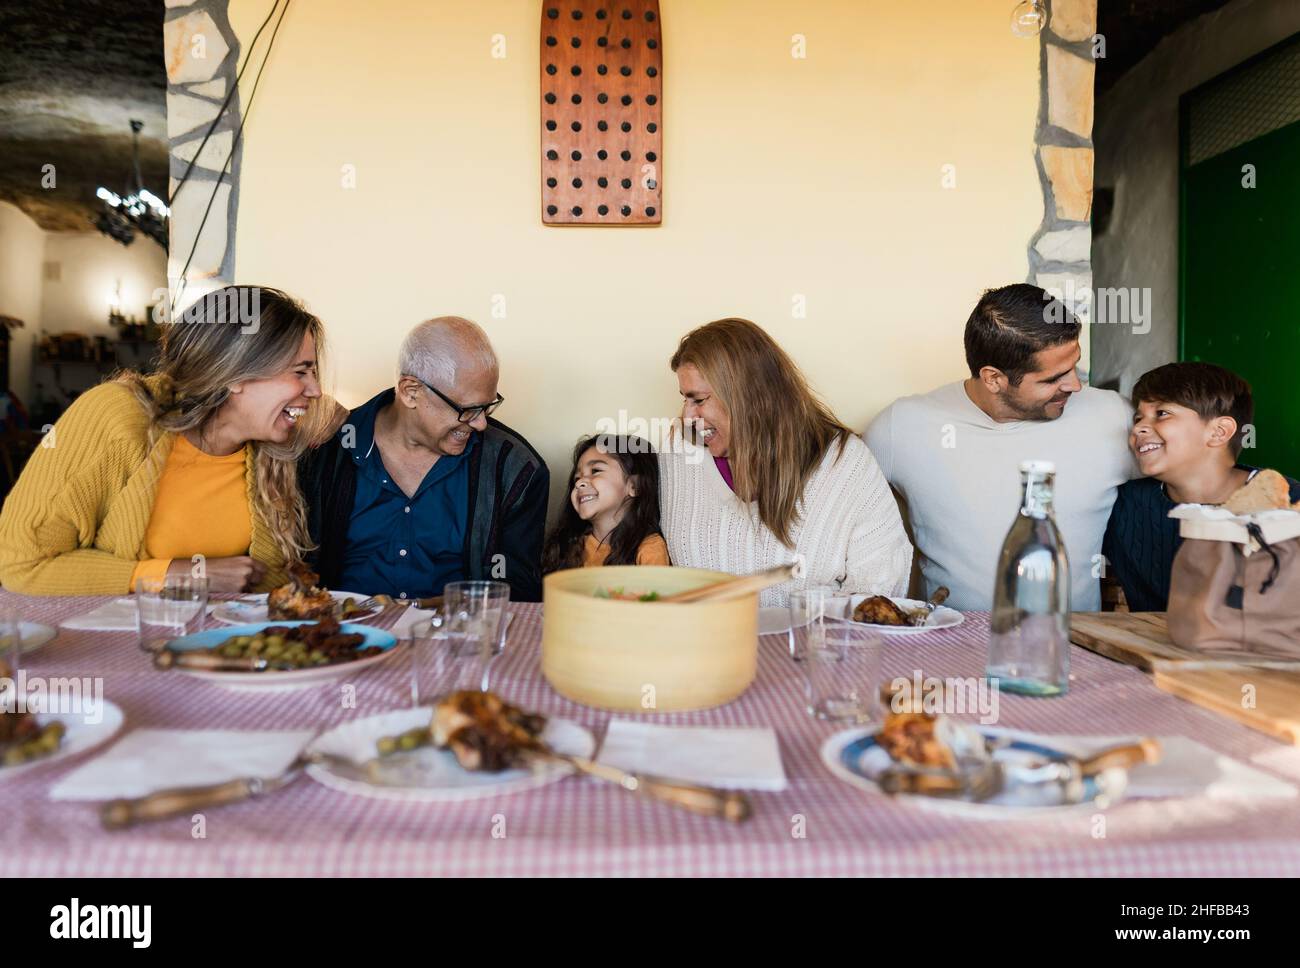 Happy Latin family having fun lunching together at home Stock Photo